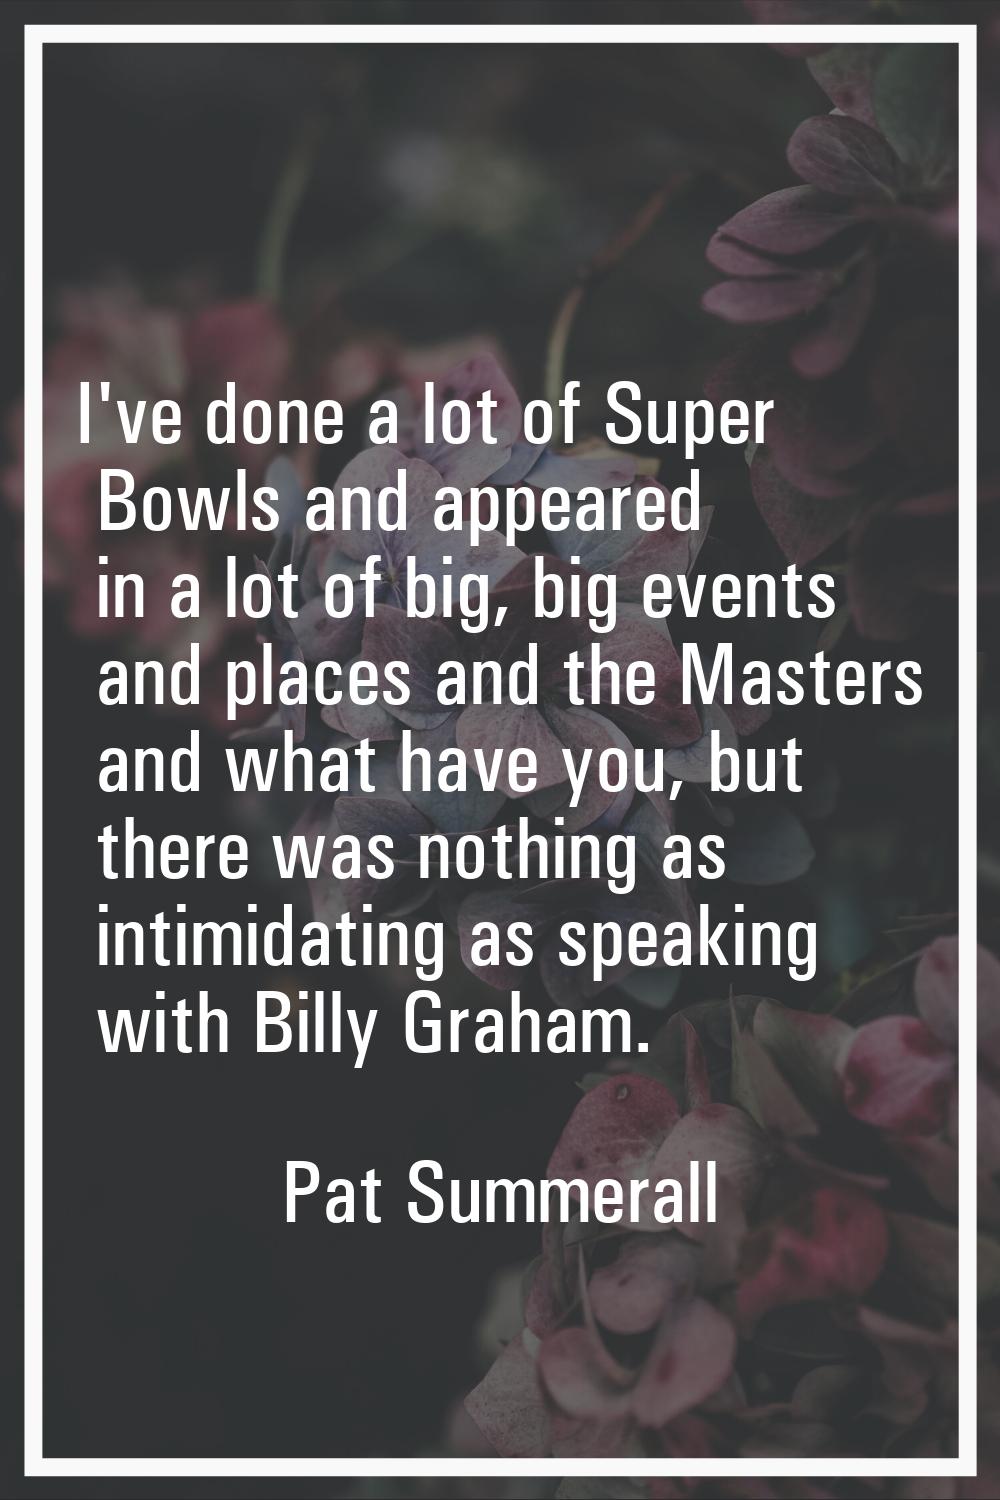 I've done a lot of Super Bowls and appeared in a lot of big, big events and places and the Masters 